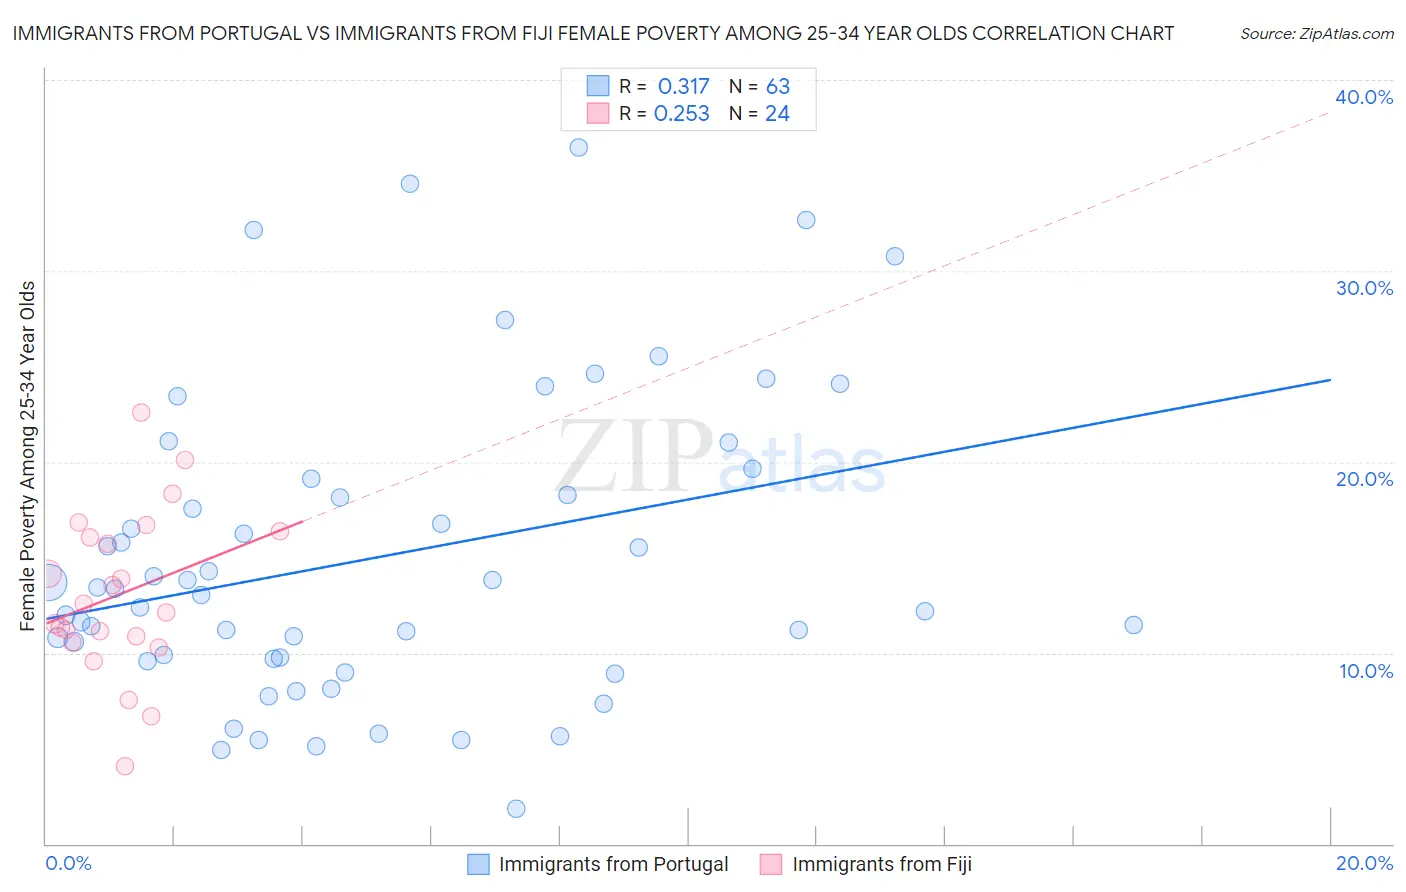 Immigrants from Portugal vs Immigrants from Fiji Female Poverty Among 25-34 Year Olds